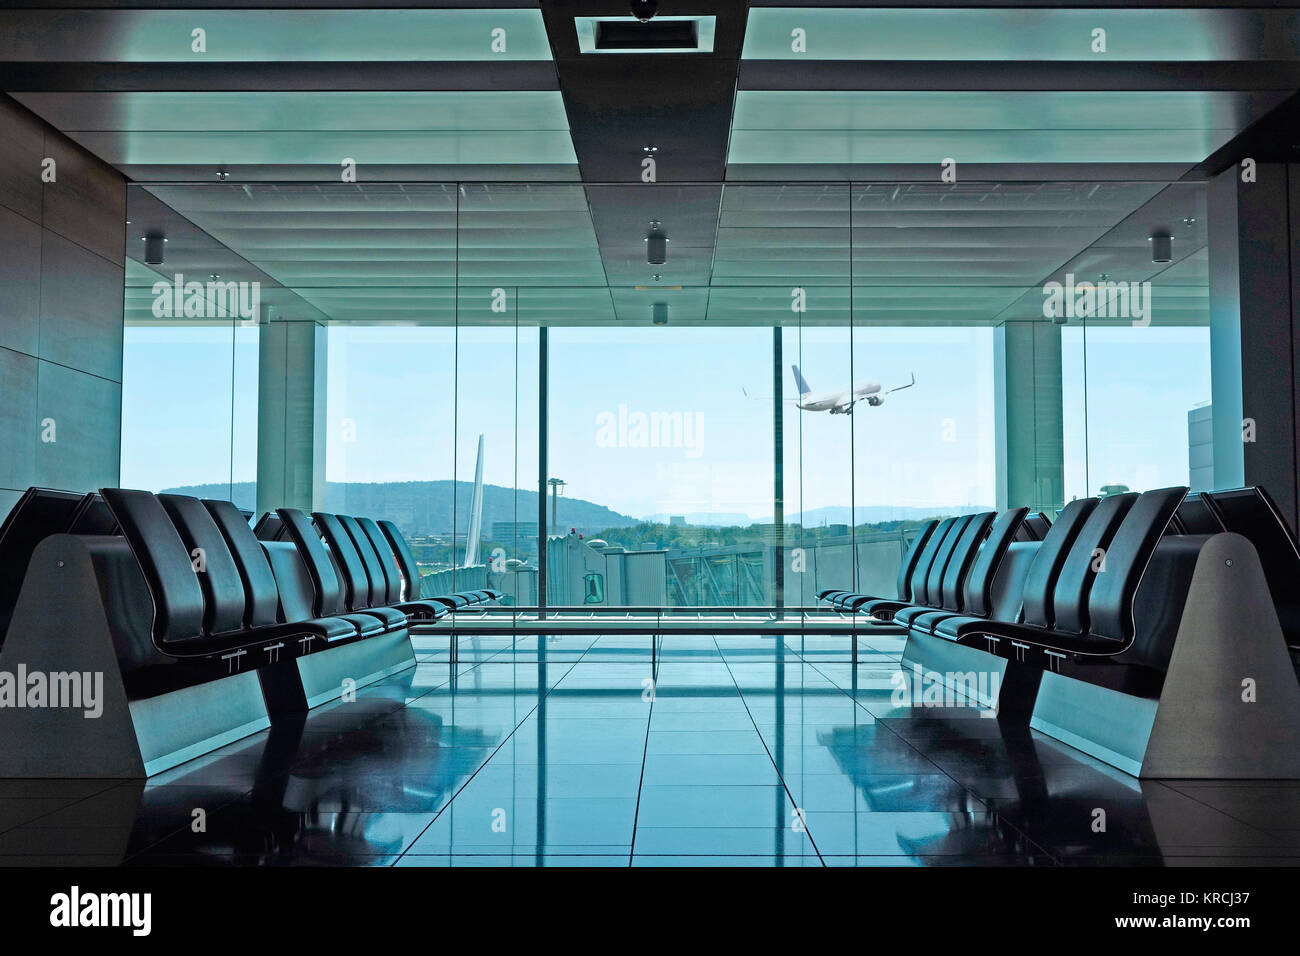 An empty modern airport departure lounge with seating and plane taking off in the background Stock Photo